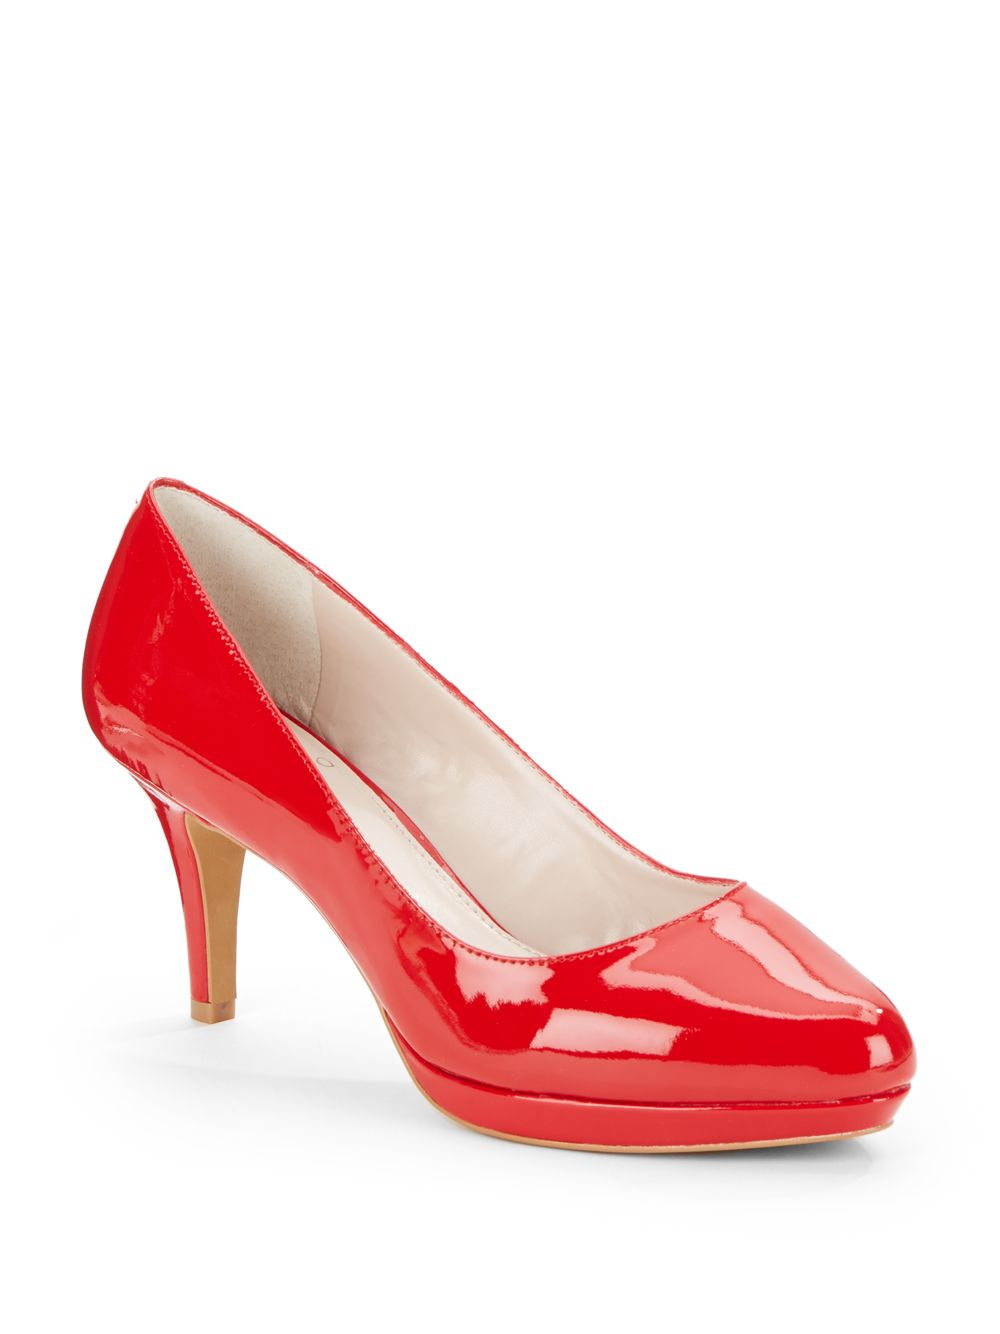 Vince Camuto Desti Patent Leather Platform Pumps in Red | Lyst